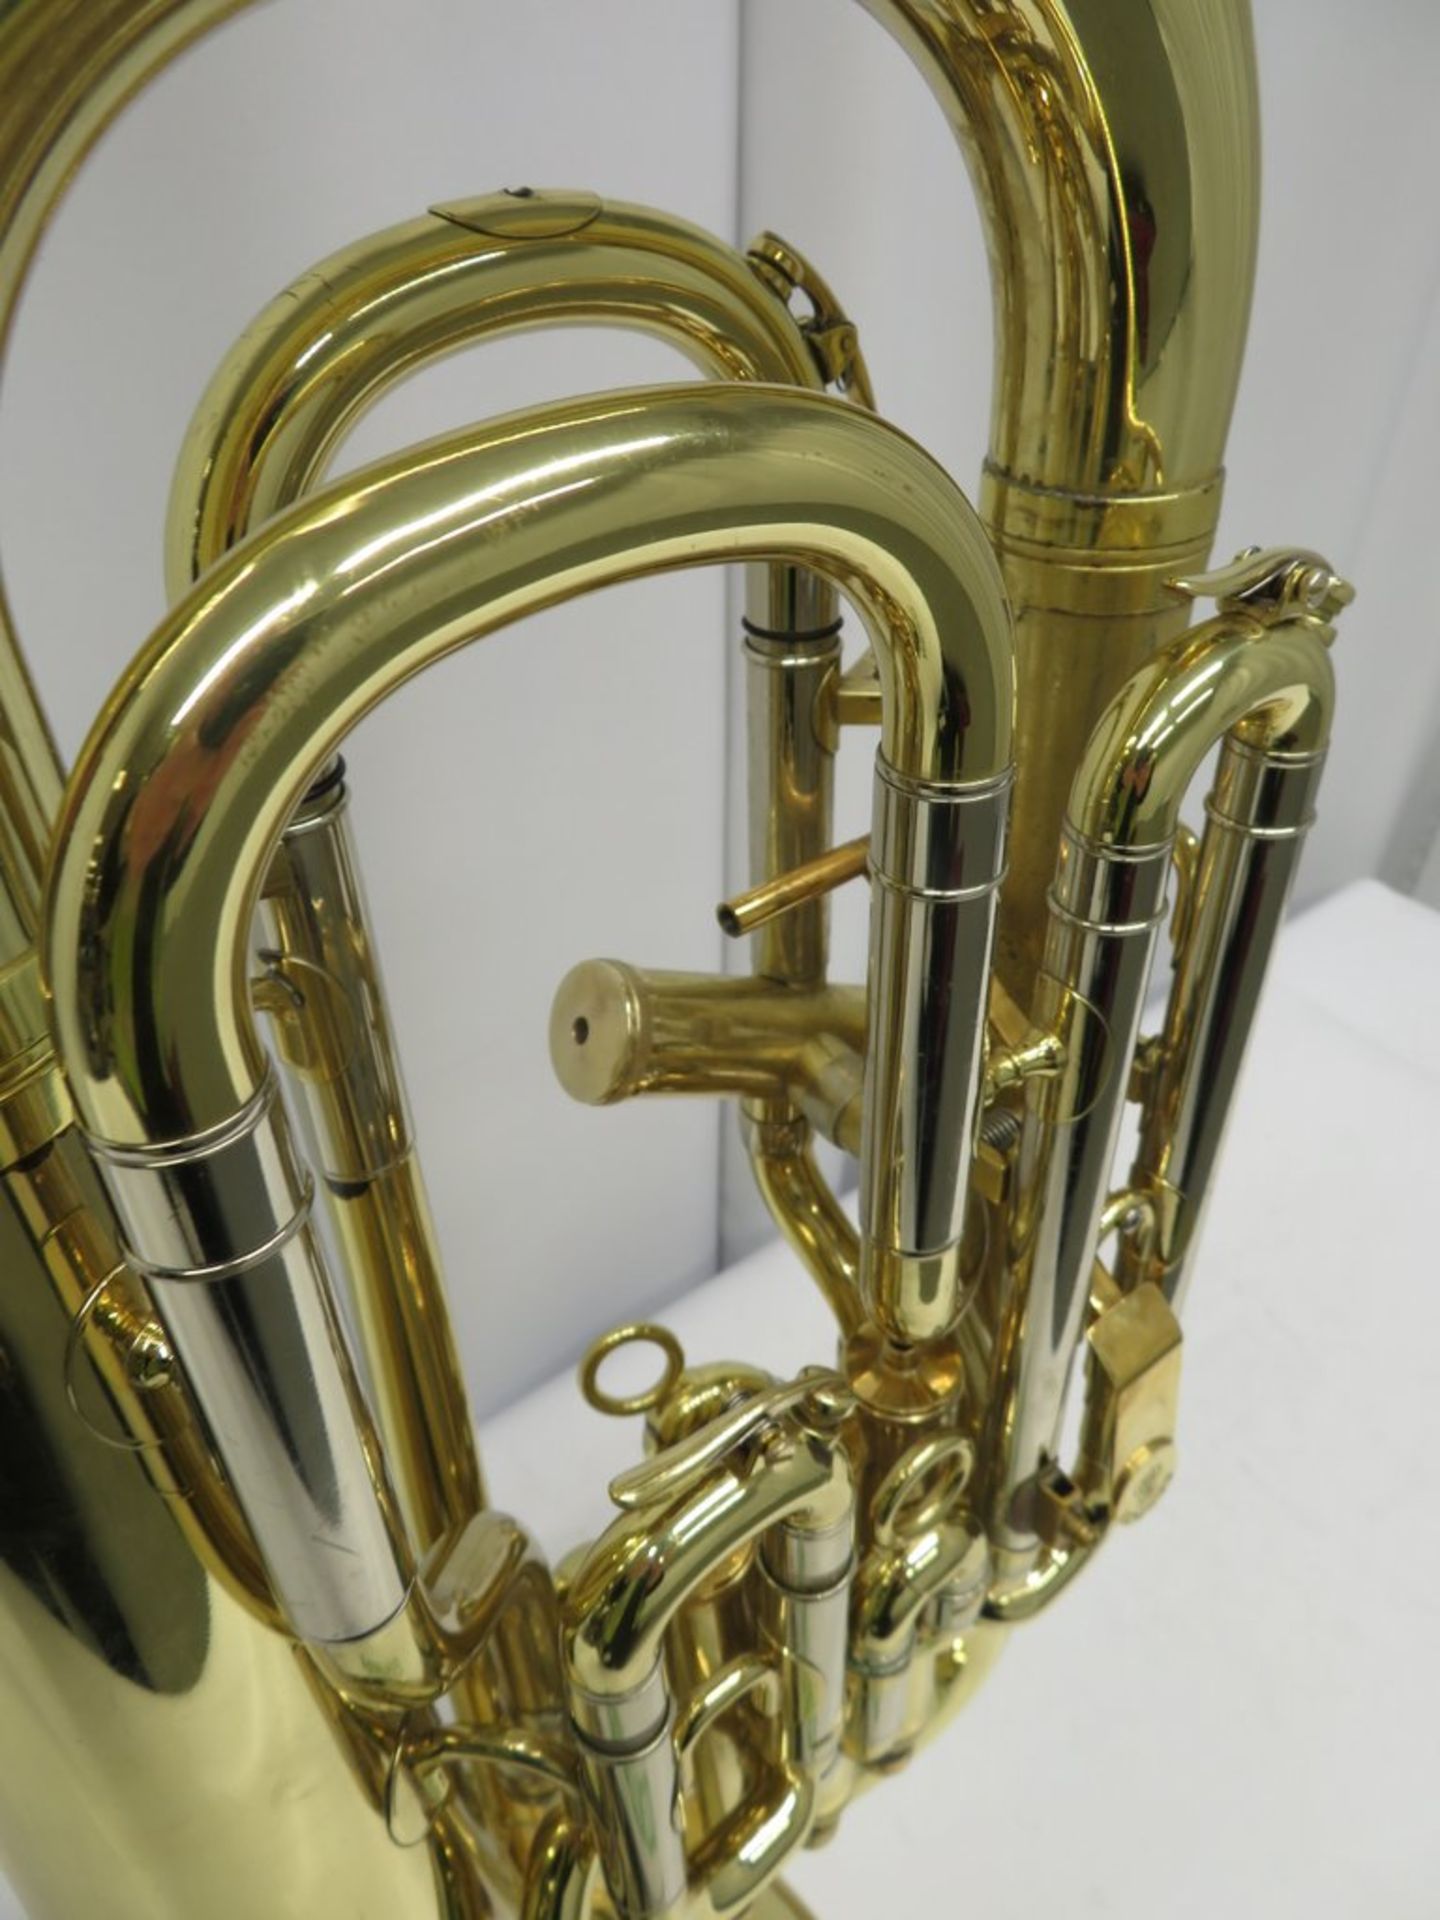 Besson Prestige BE2052 Euphonium With Case. Serial Number: 08300275. Please Note This Ite - Image 6 of 16